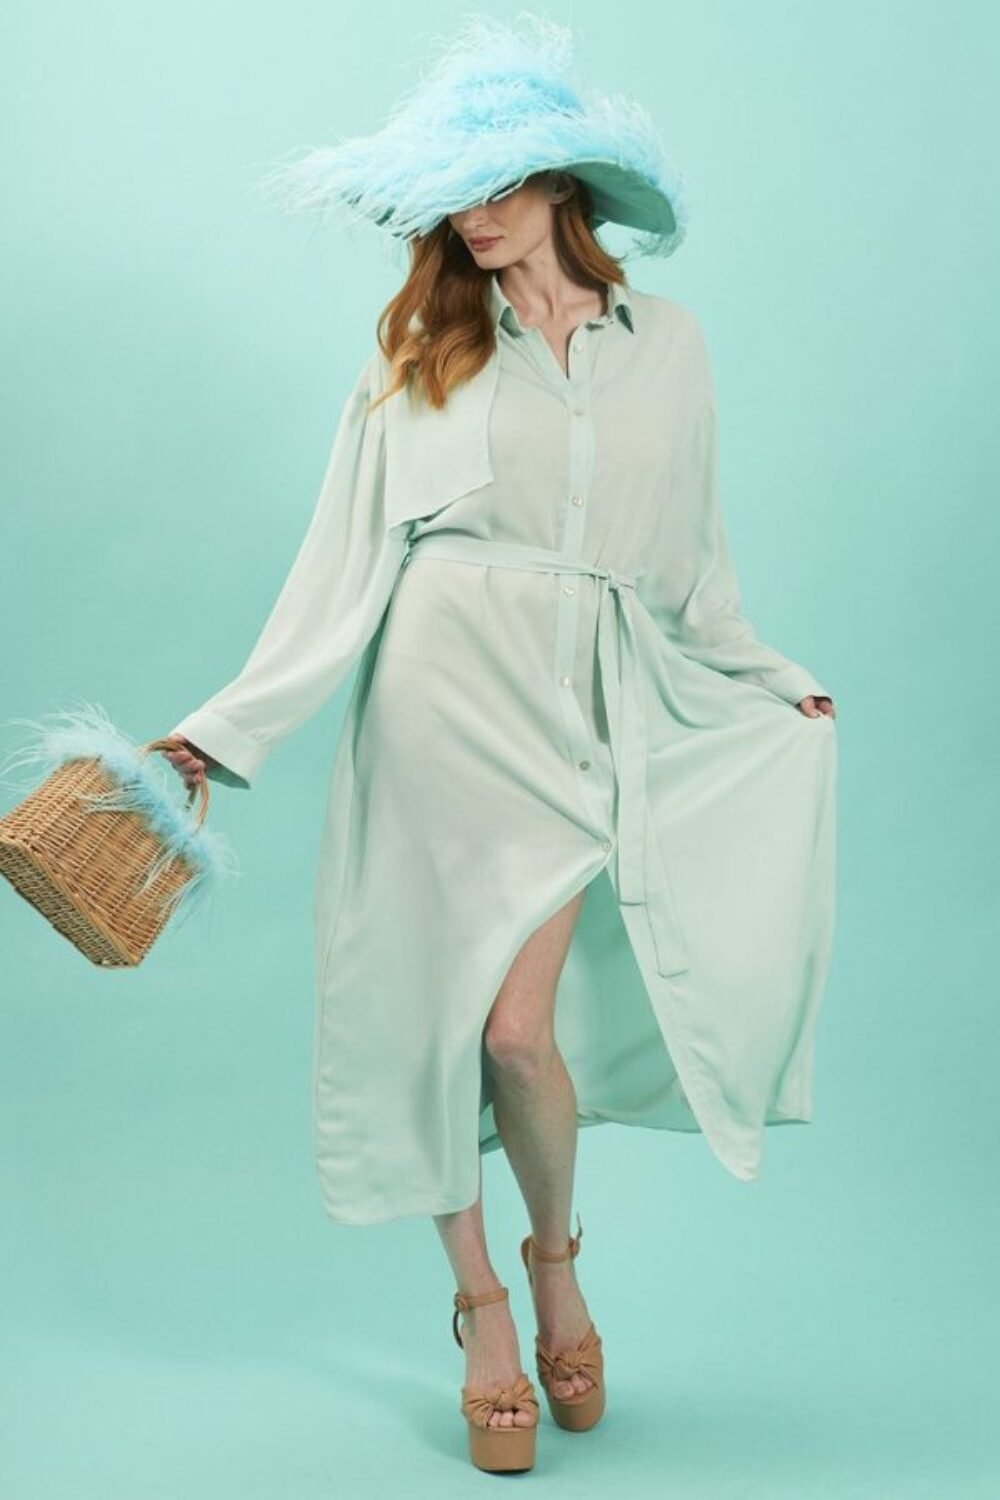 Shop Lux Light Blue Silk Blend Maxi Shirt Dress and women's luxury and designer clothes at www.lux-apparel.co.uk